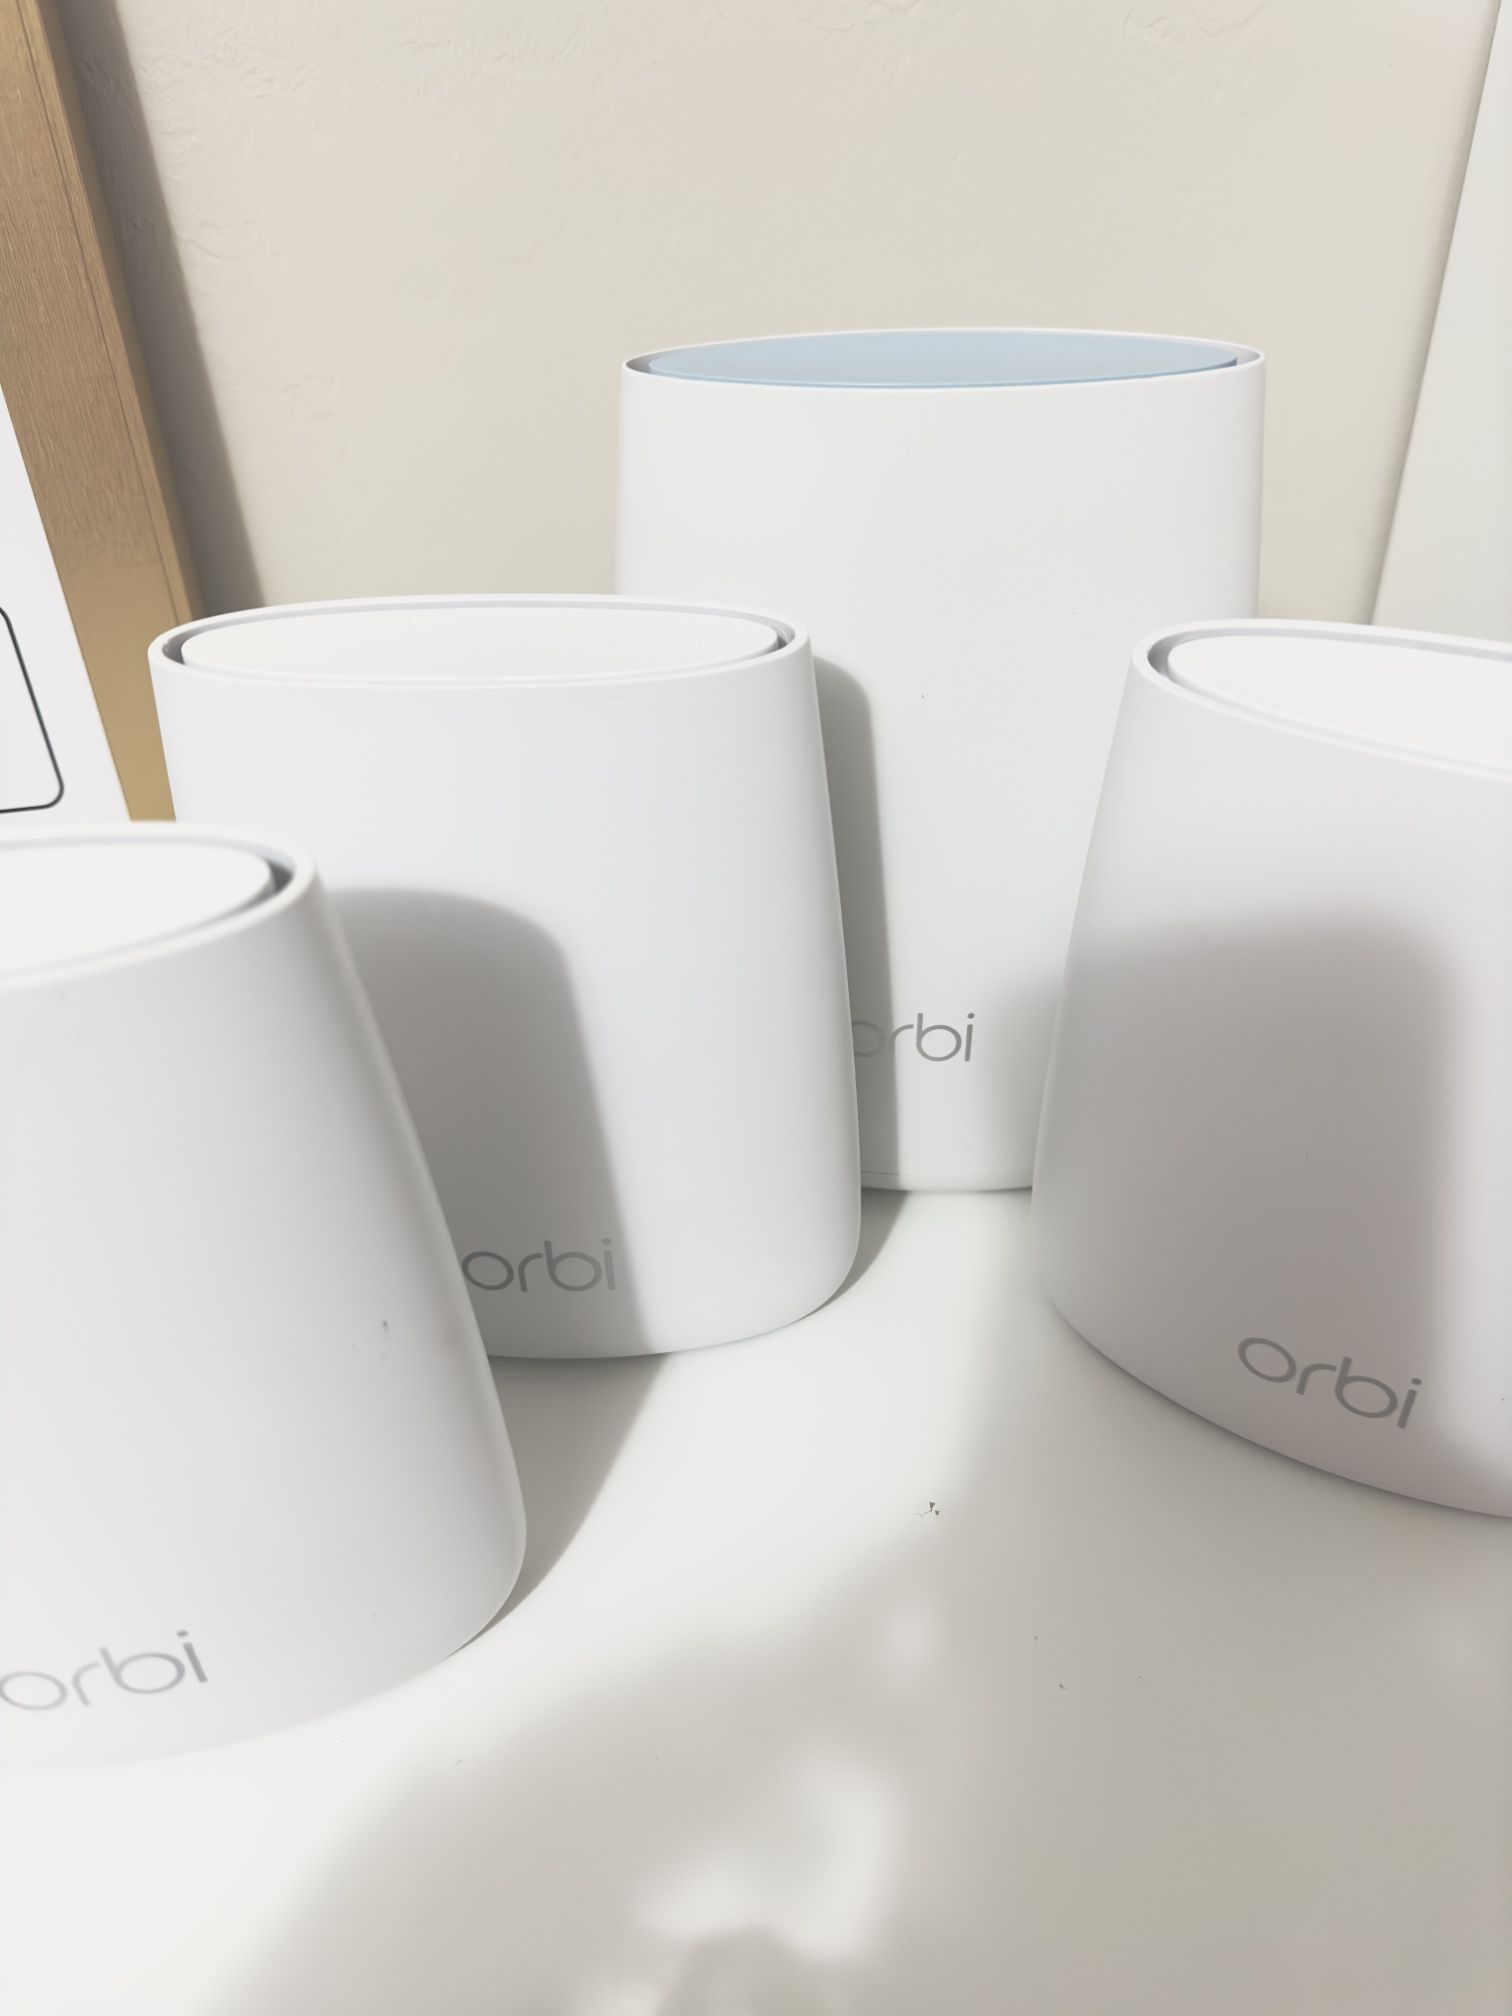 Netgear Orbi Router RBR40 with 3 Satellites